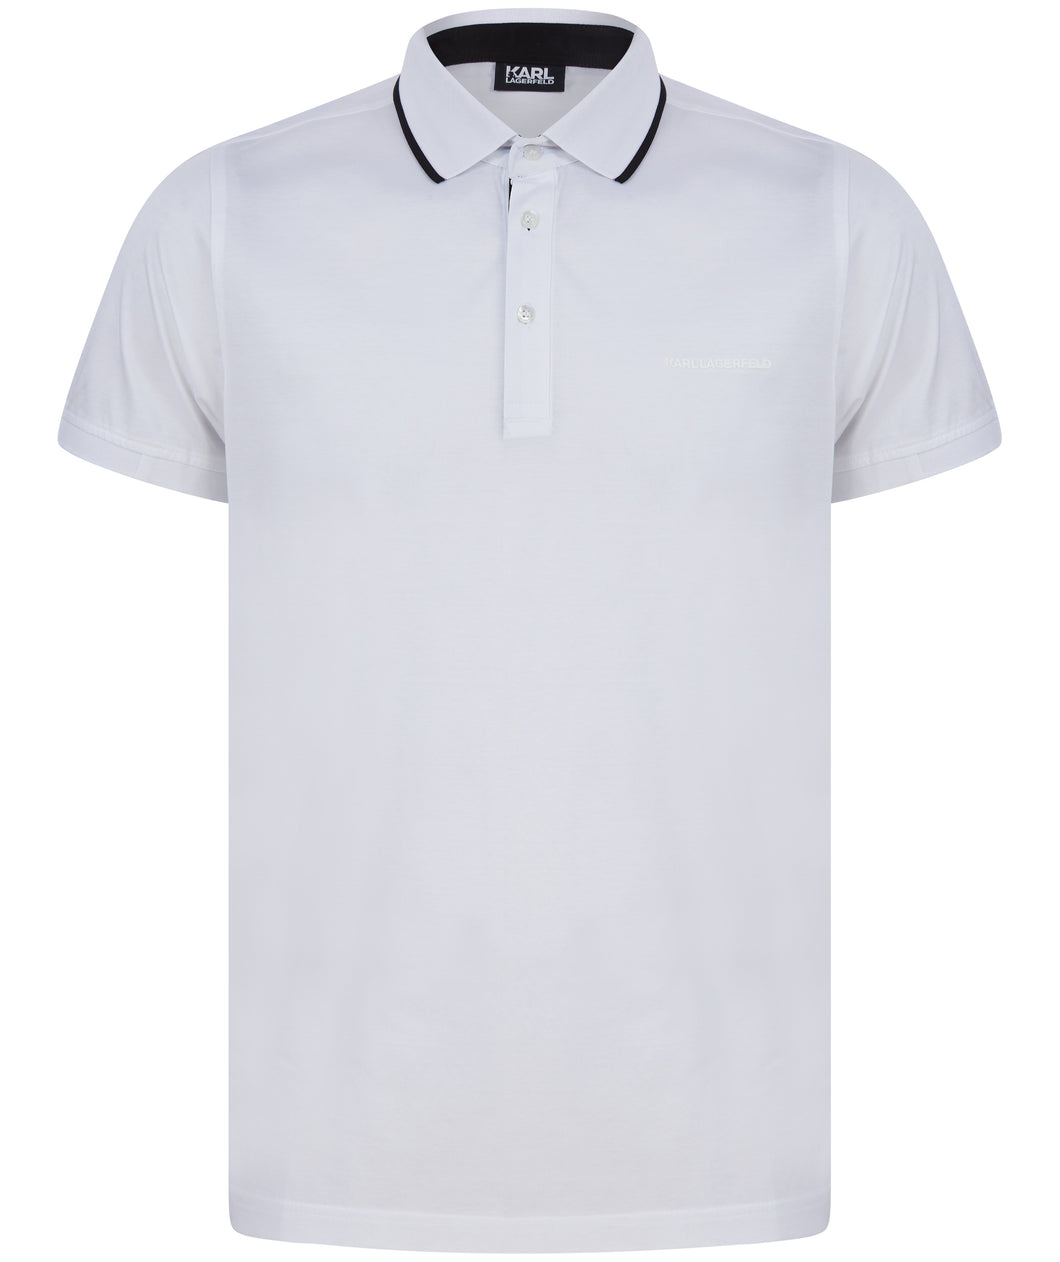 Lagerfeld Tipped Polo Shirt White